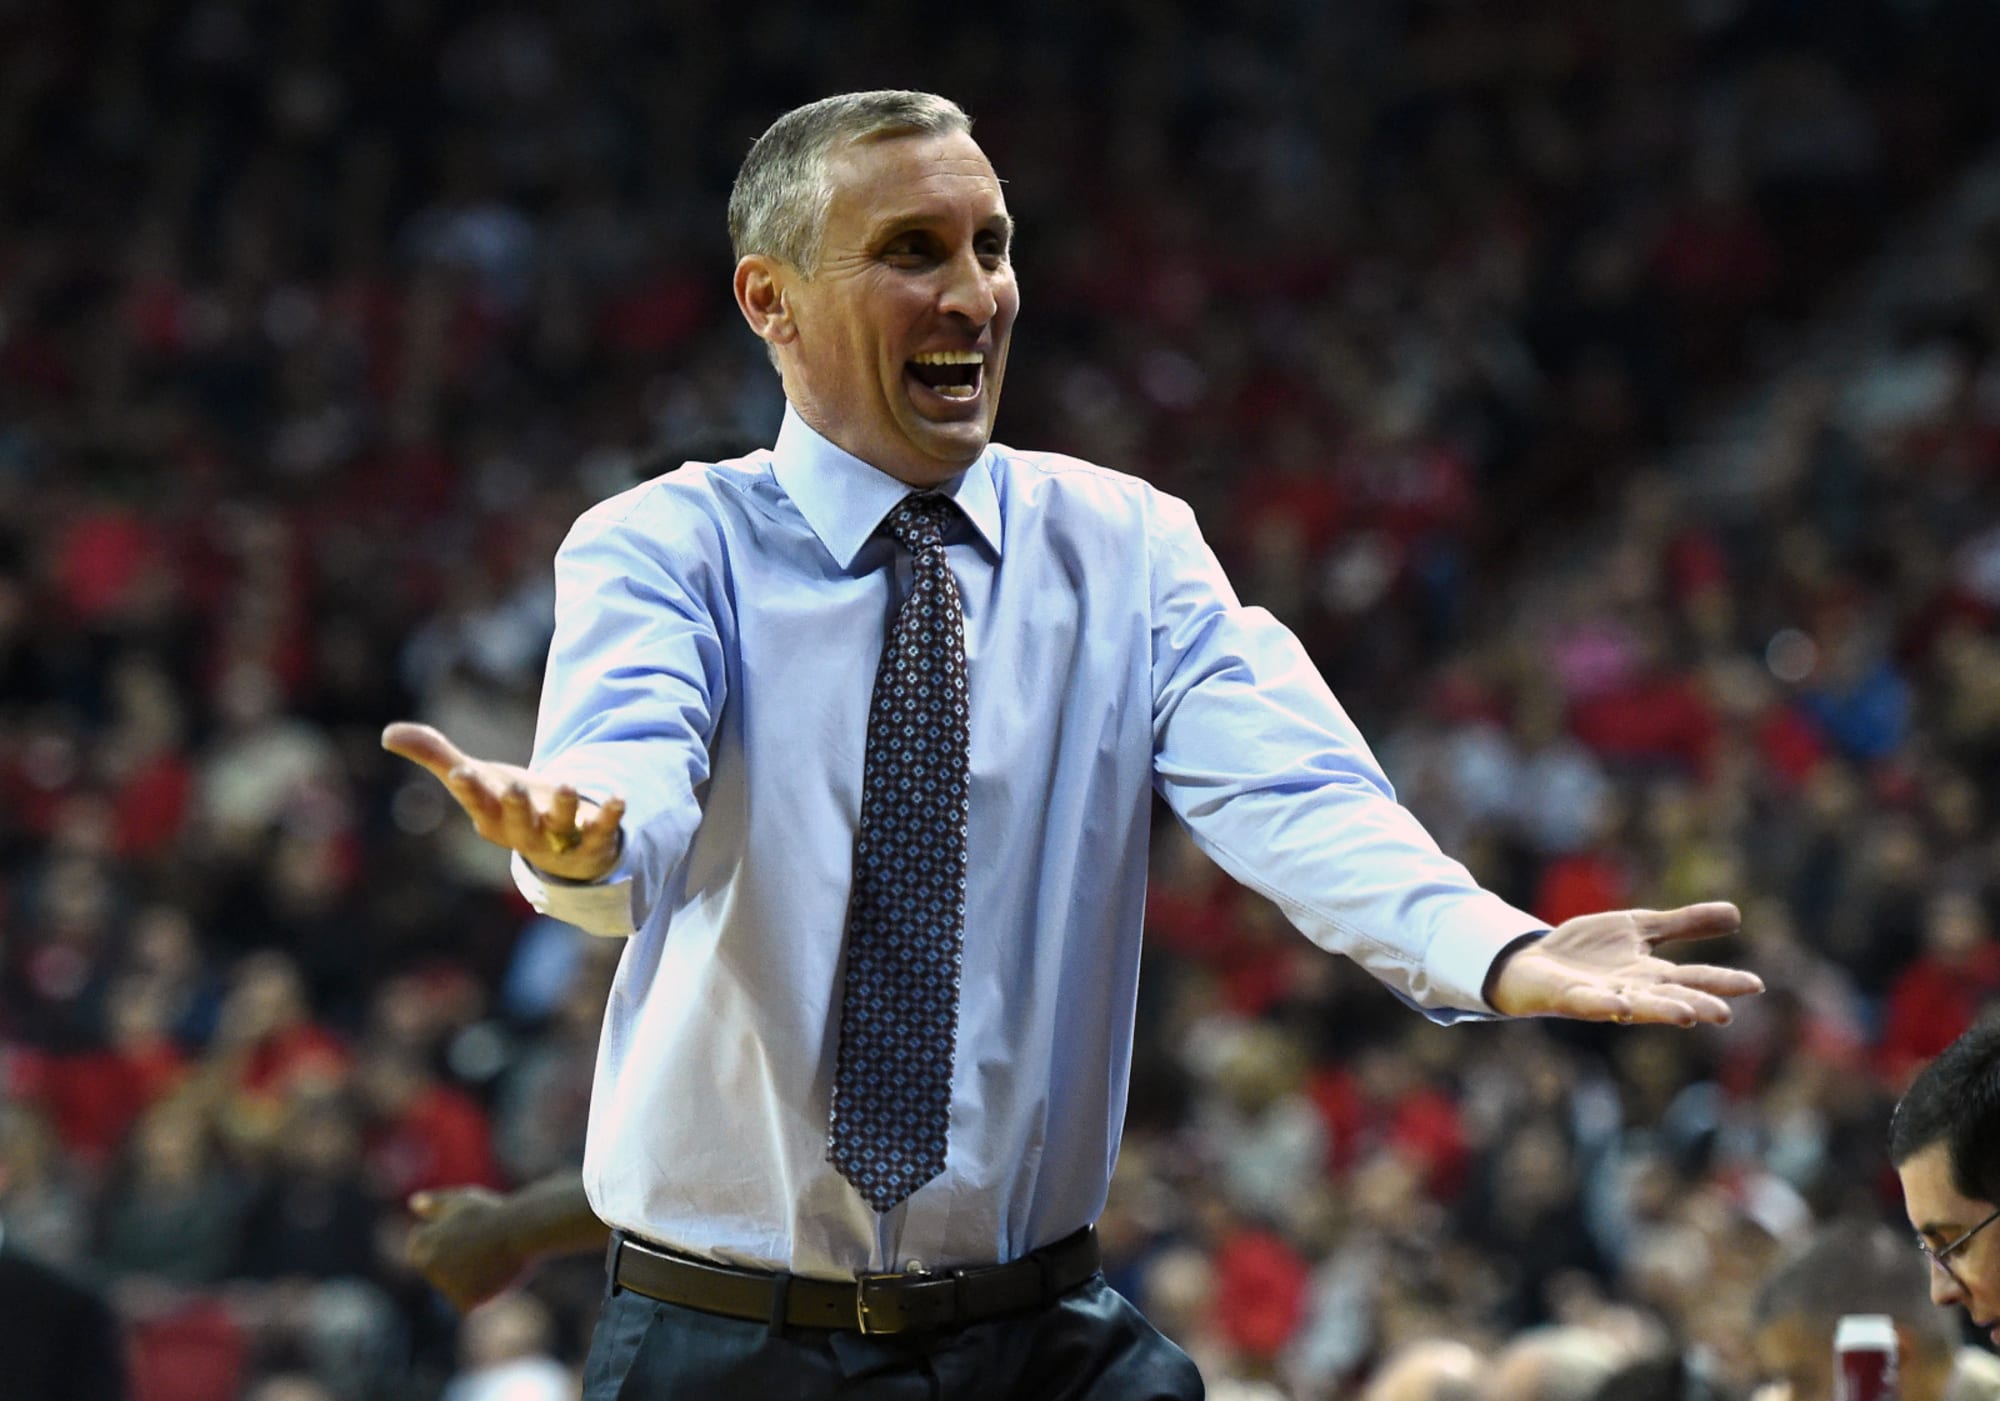 Duke Basketball: Bobby Hurley wins 100th game 25 years after accident